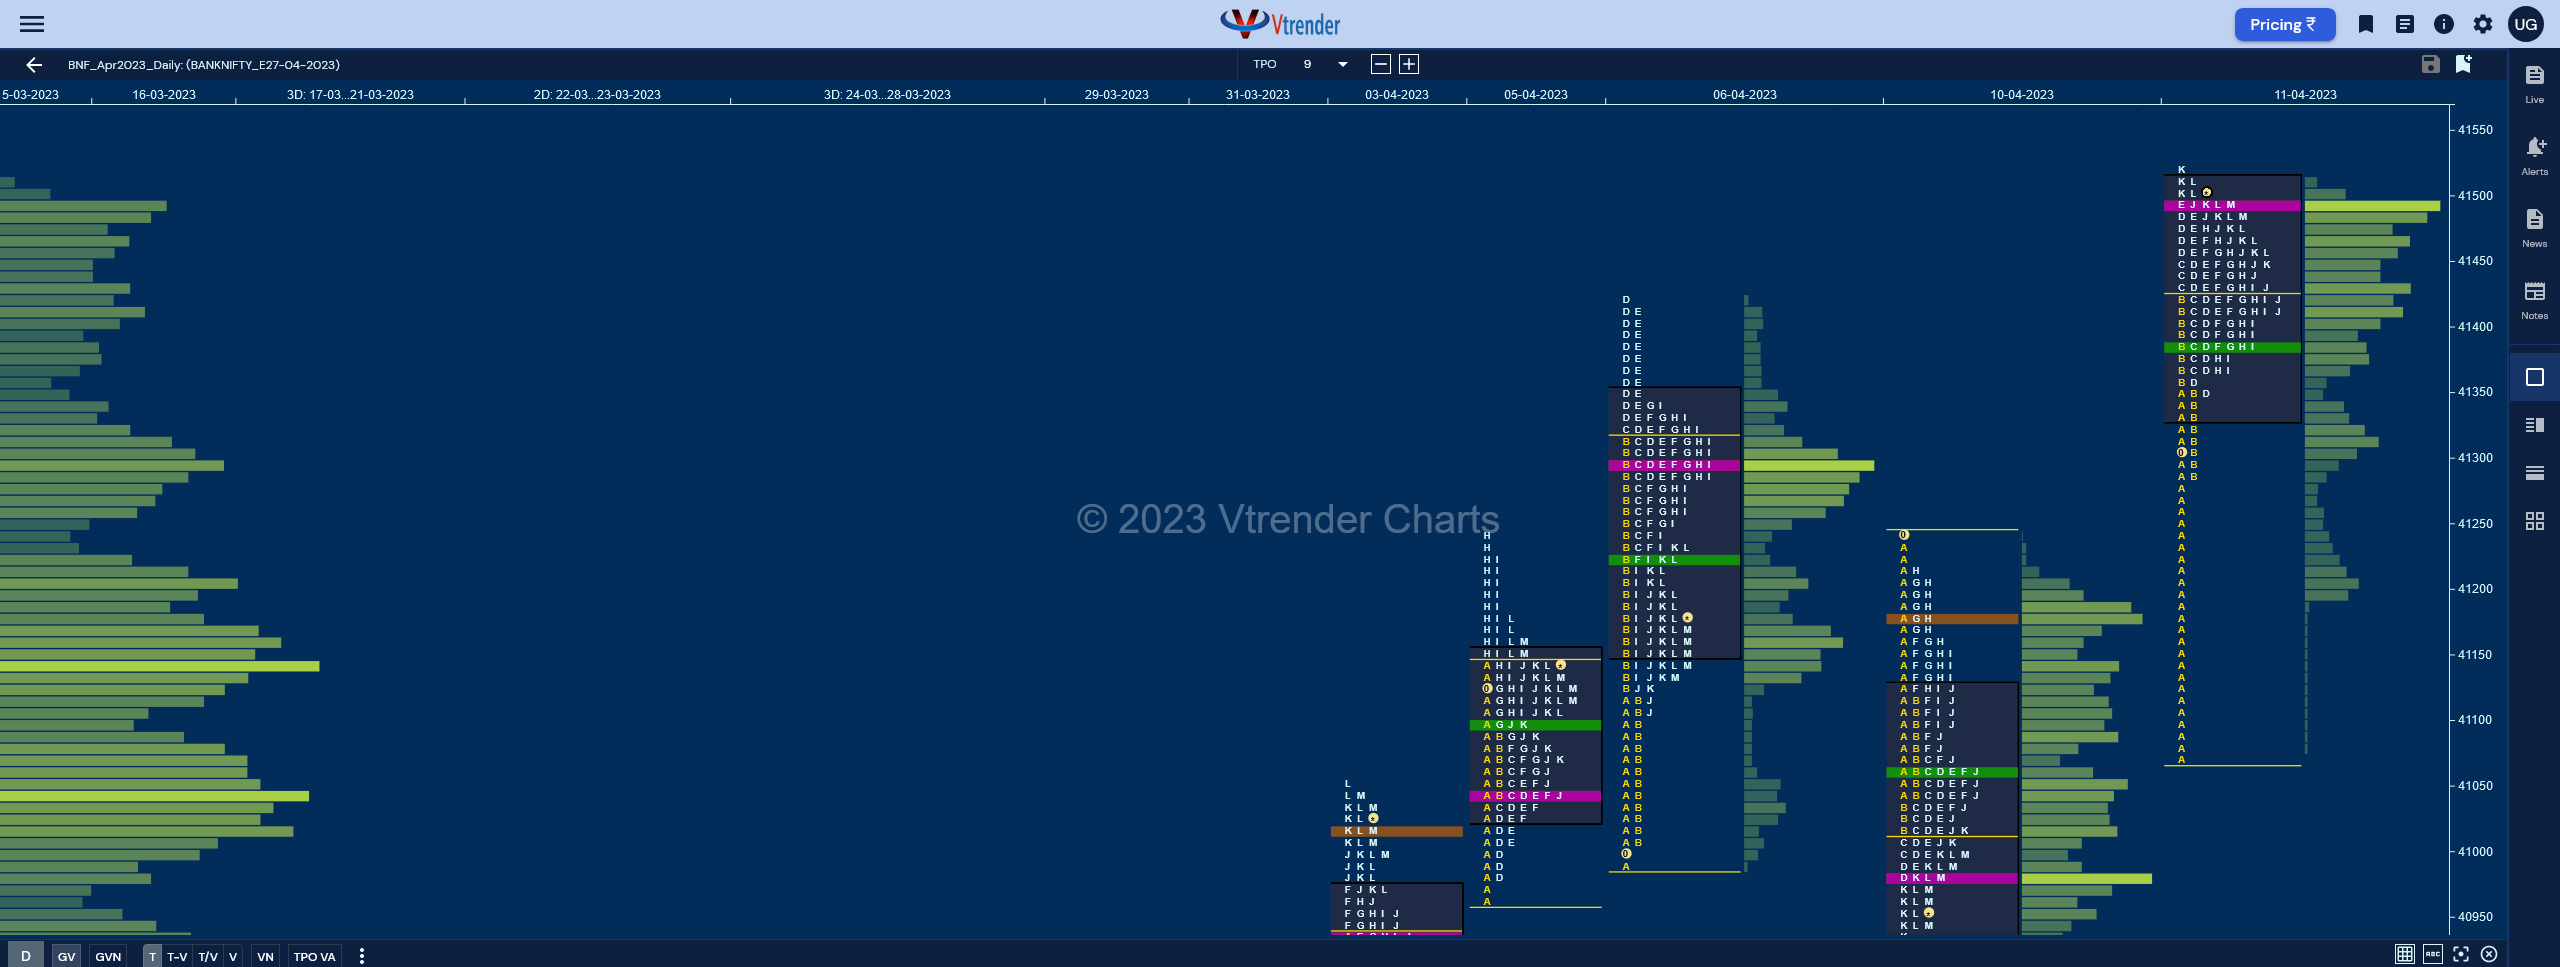 Bnf 5 Market Profile Analysis Dated 11Th Apr 2023 Banknifty Futures, Charts, Day Trading, Intraday Trading, Intraday Trading Strategies, Market Profile, Market Profile Trading Strategies, Nifty Futures, Order Flow Analysis, Support And Resistance, Technical Analysis, Trading Strategies, Volume Profile Trading